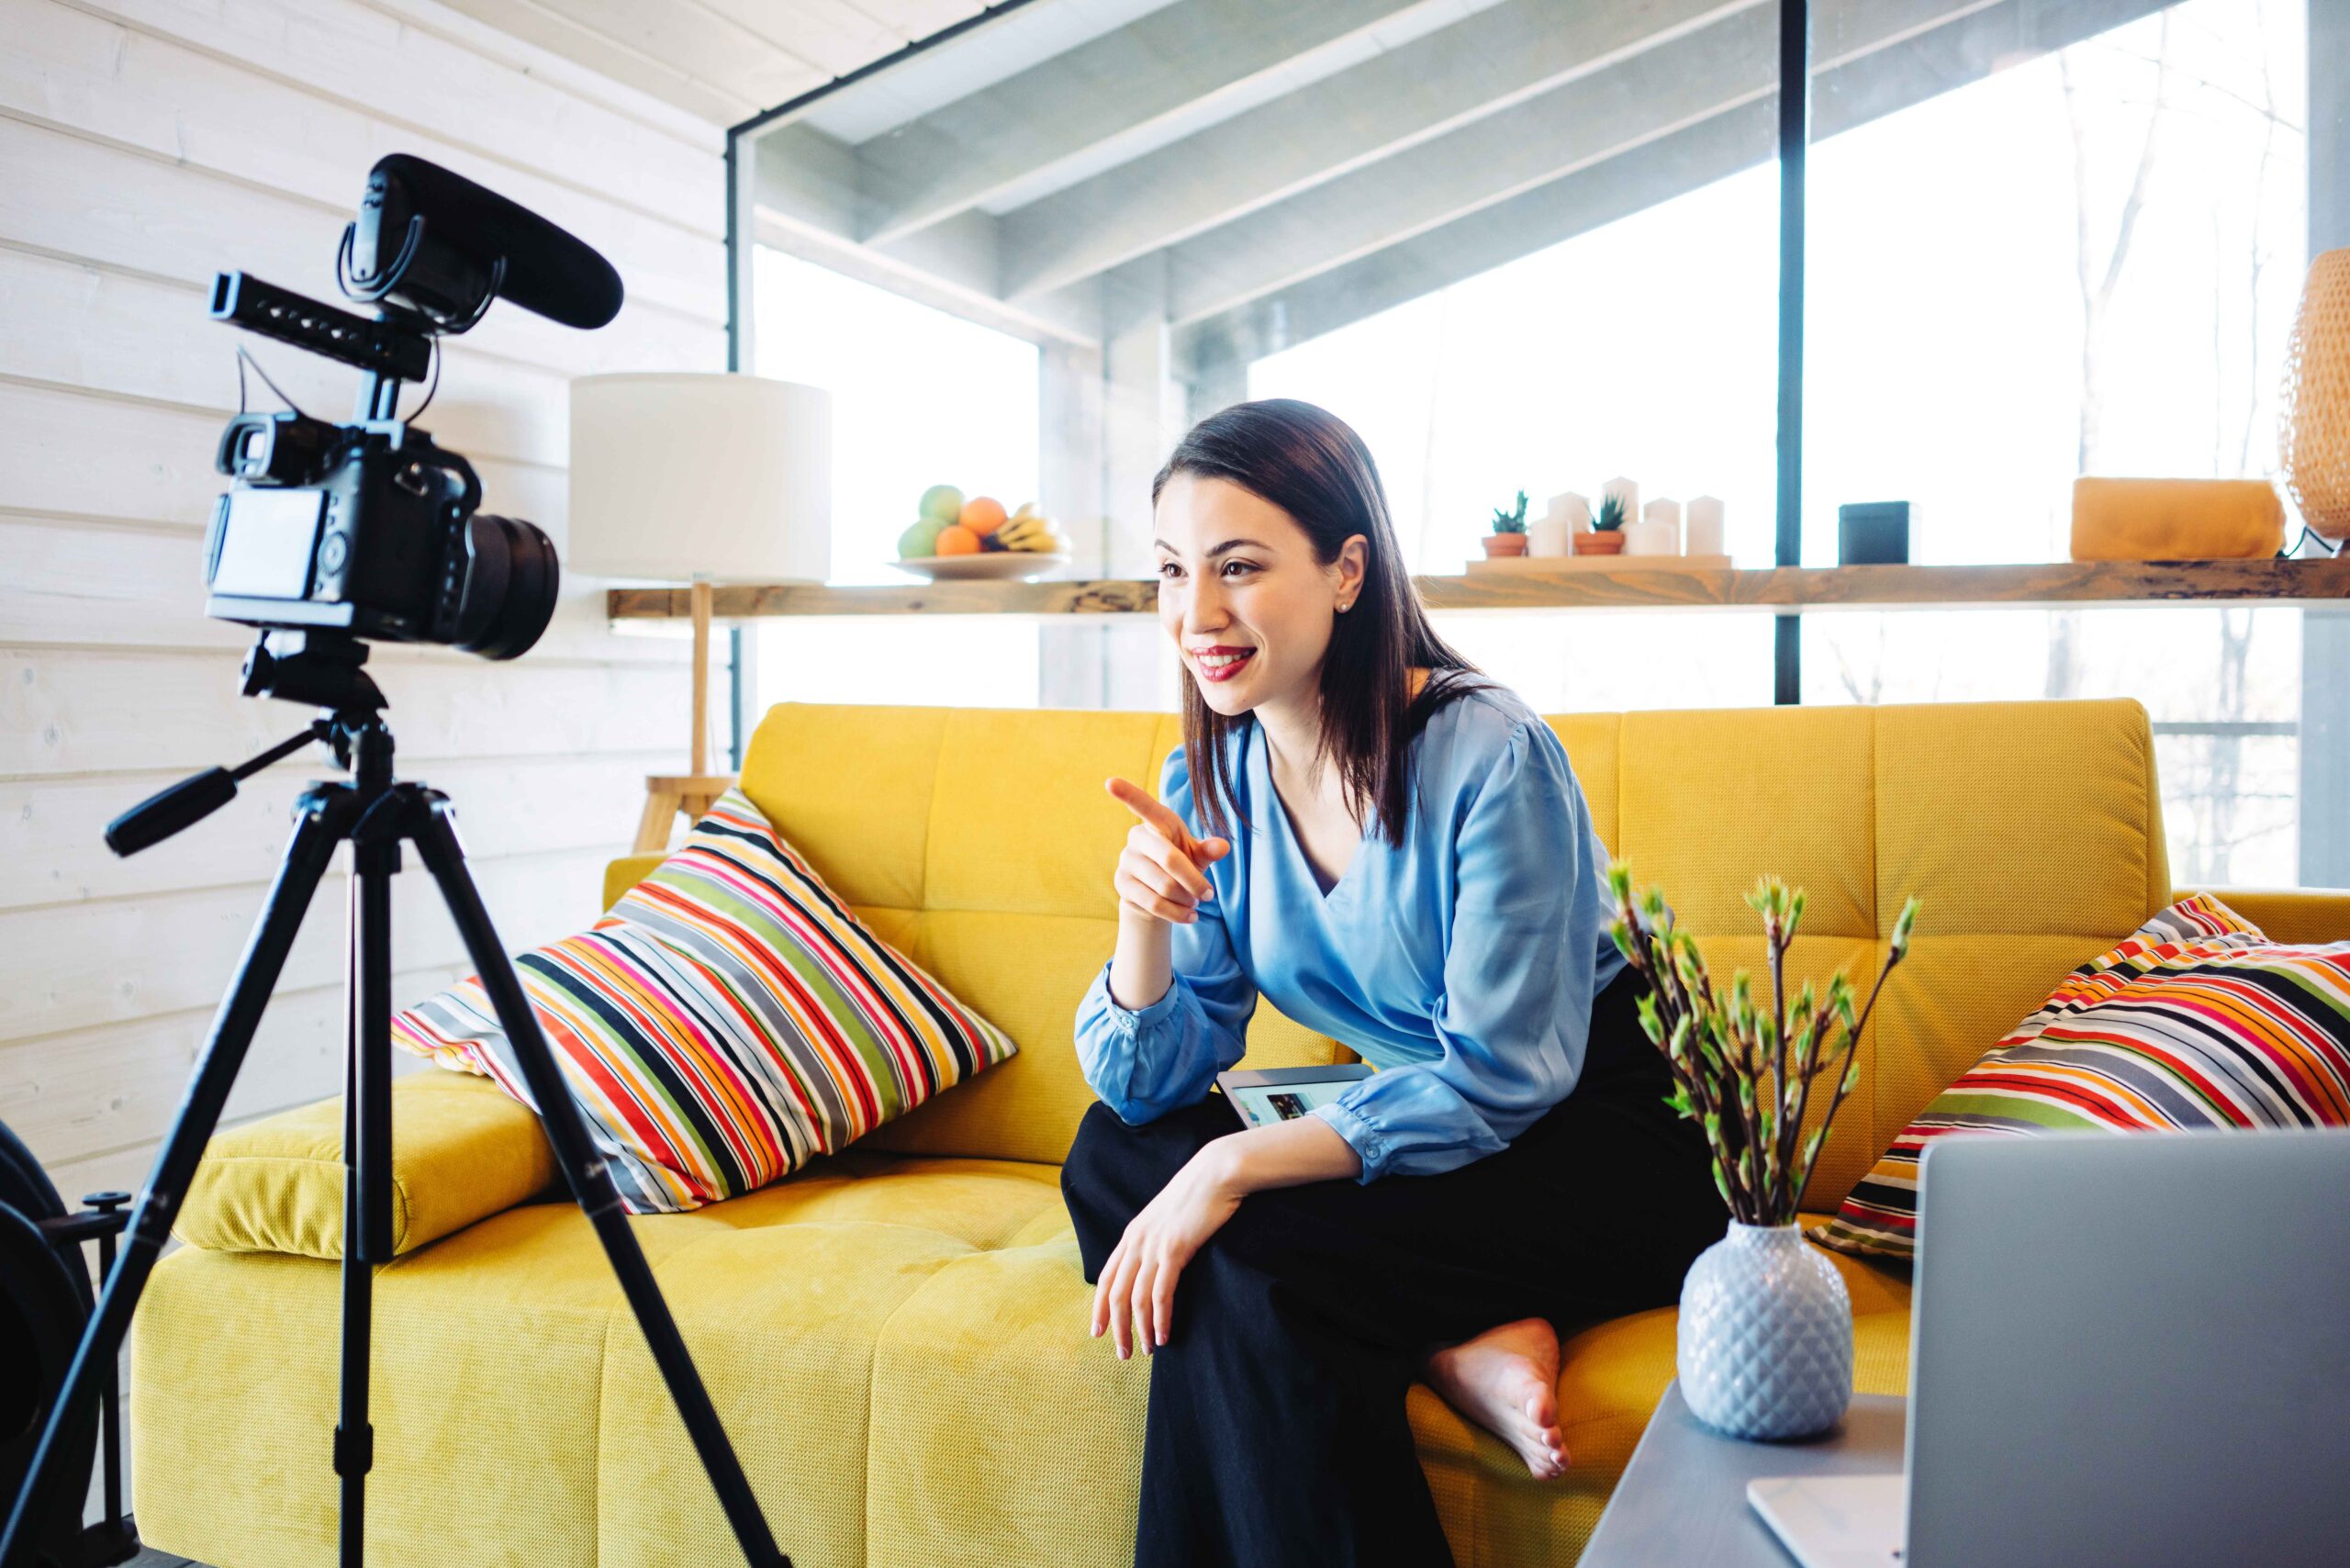 Woman seated on a yellow couch taping video content with a remote setup.